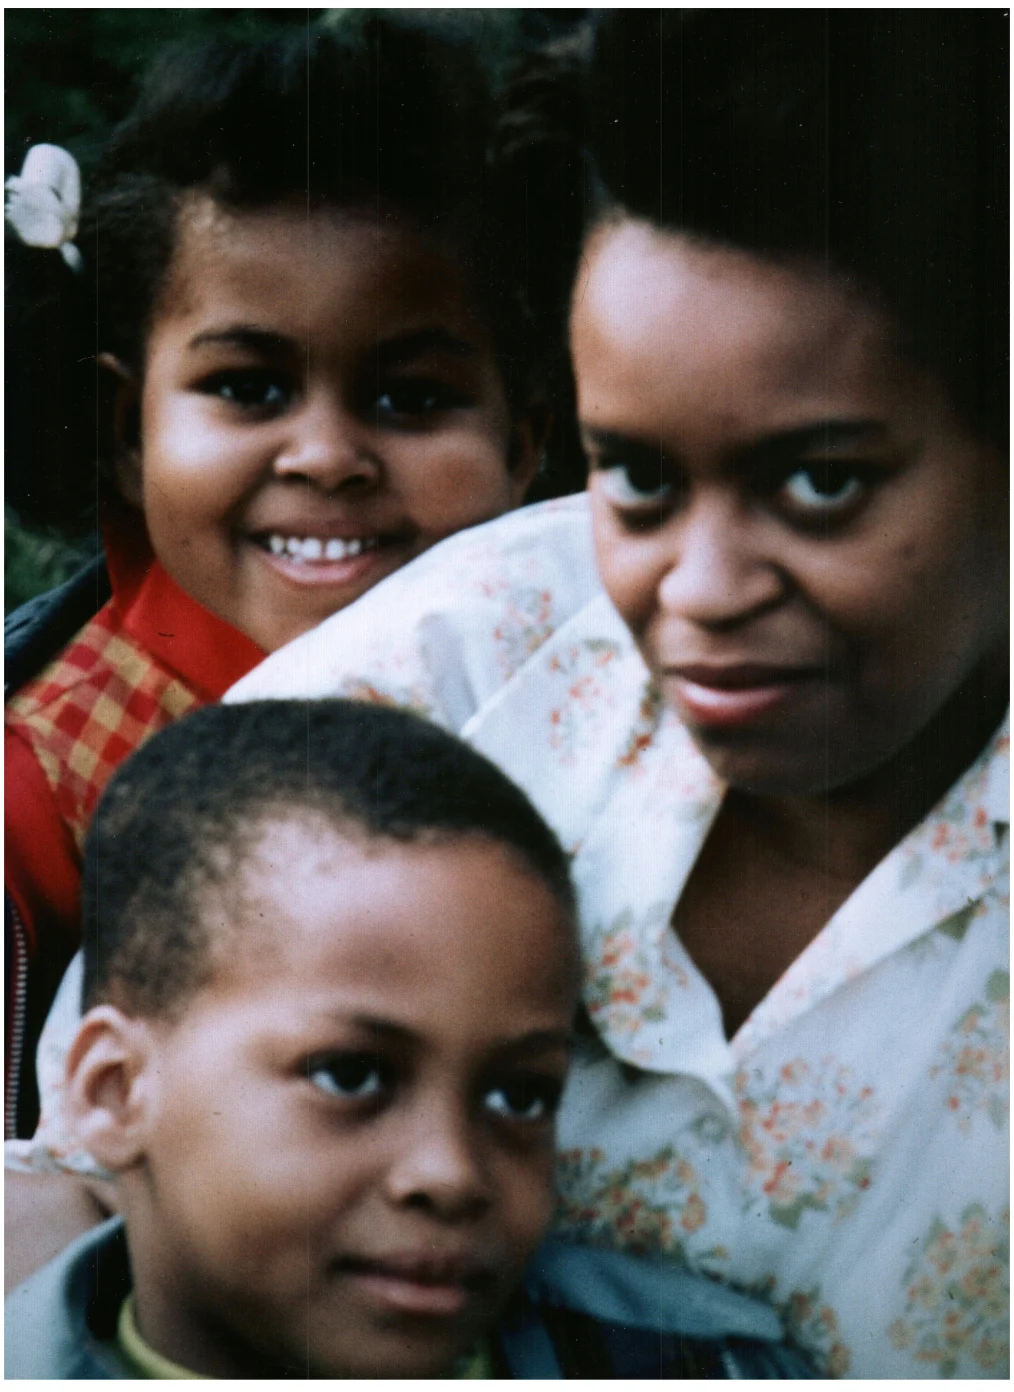 Marian Robinson poses for a photo with her children, a young Michelle Obama and Craig Robinson.